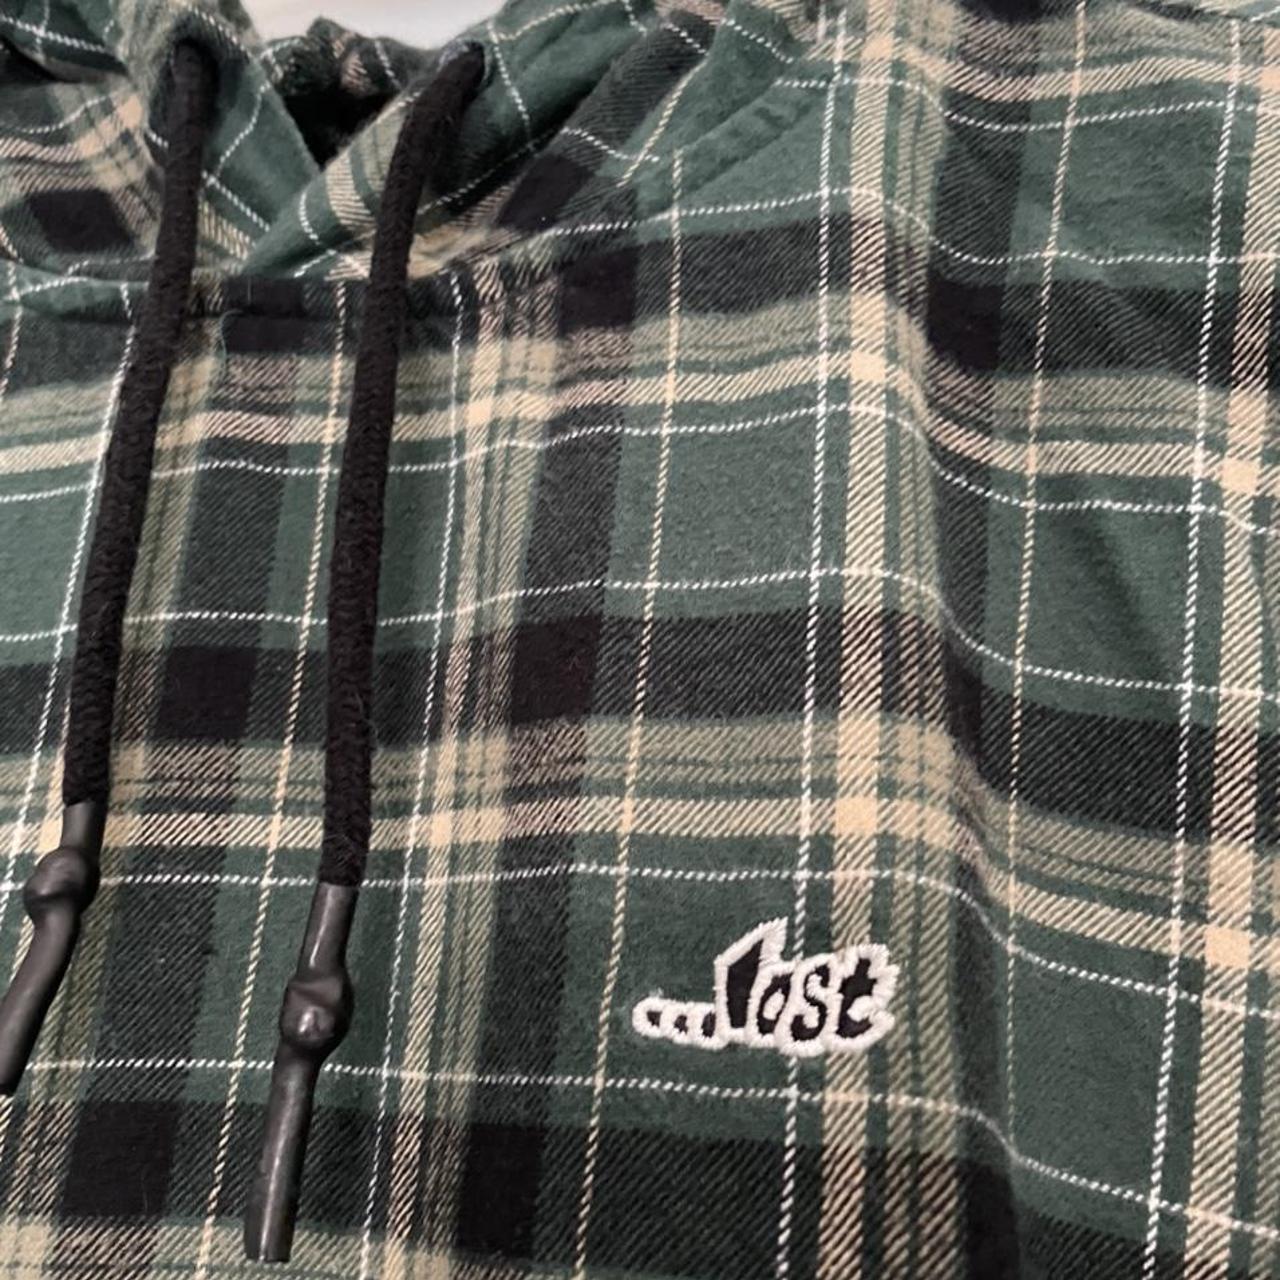 Product Image 4 - LOST skater brand green plaid